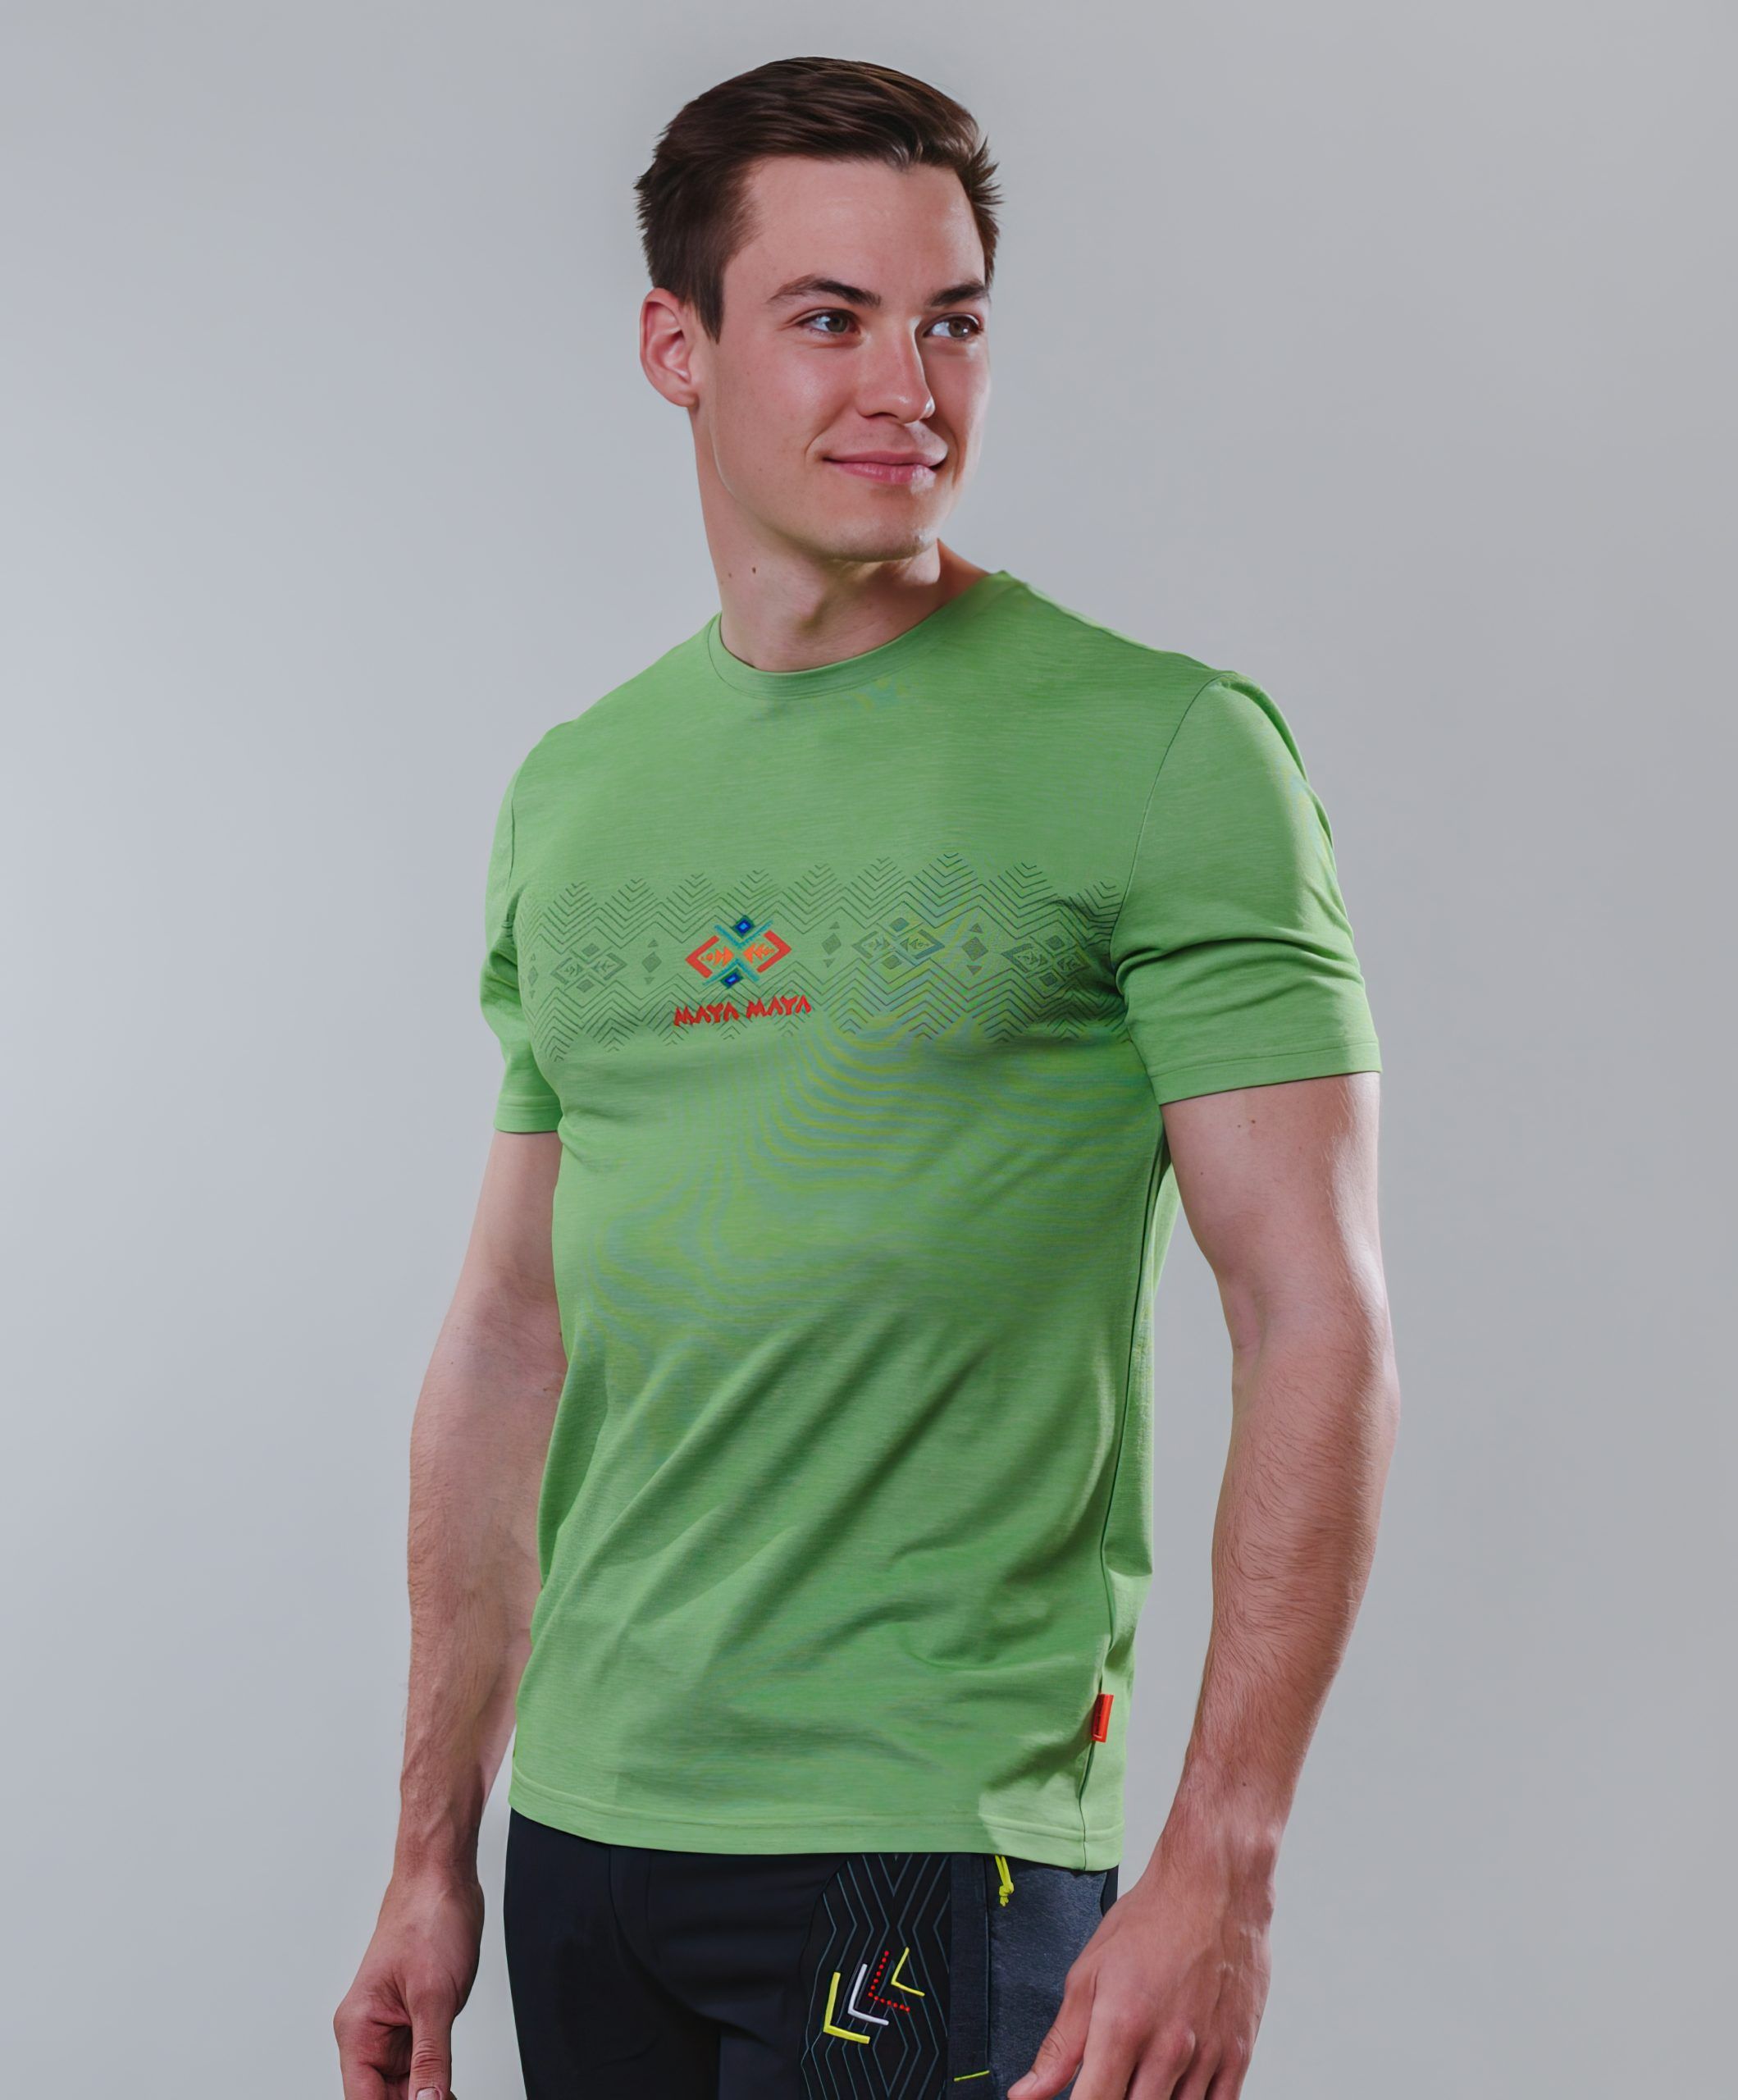 Kuk shirt green for men by MAYA MAYA made from cotton for freetime